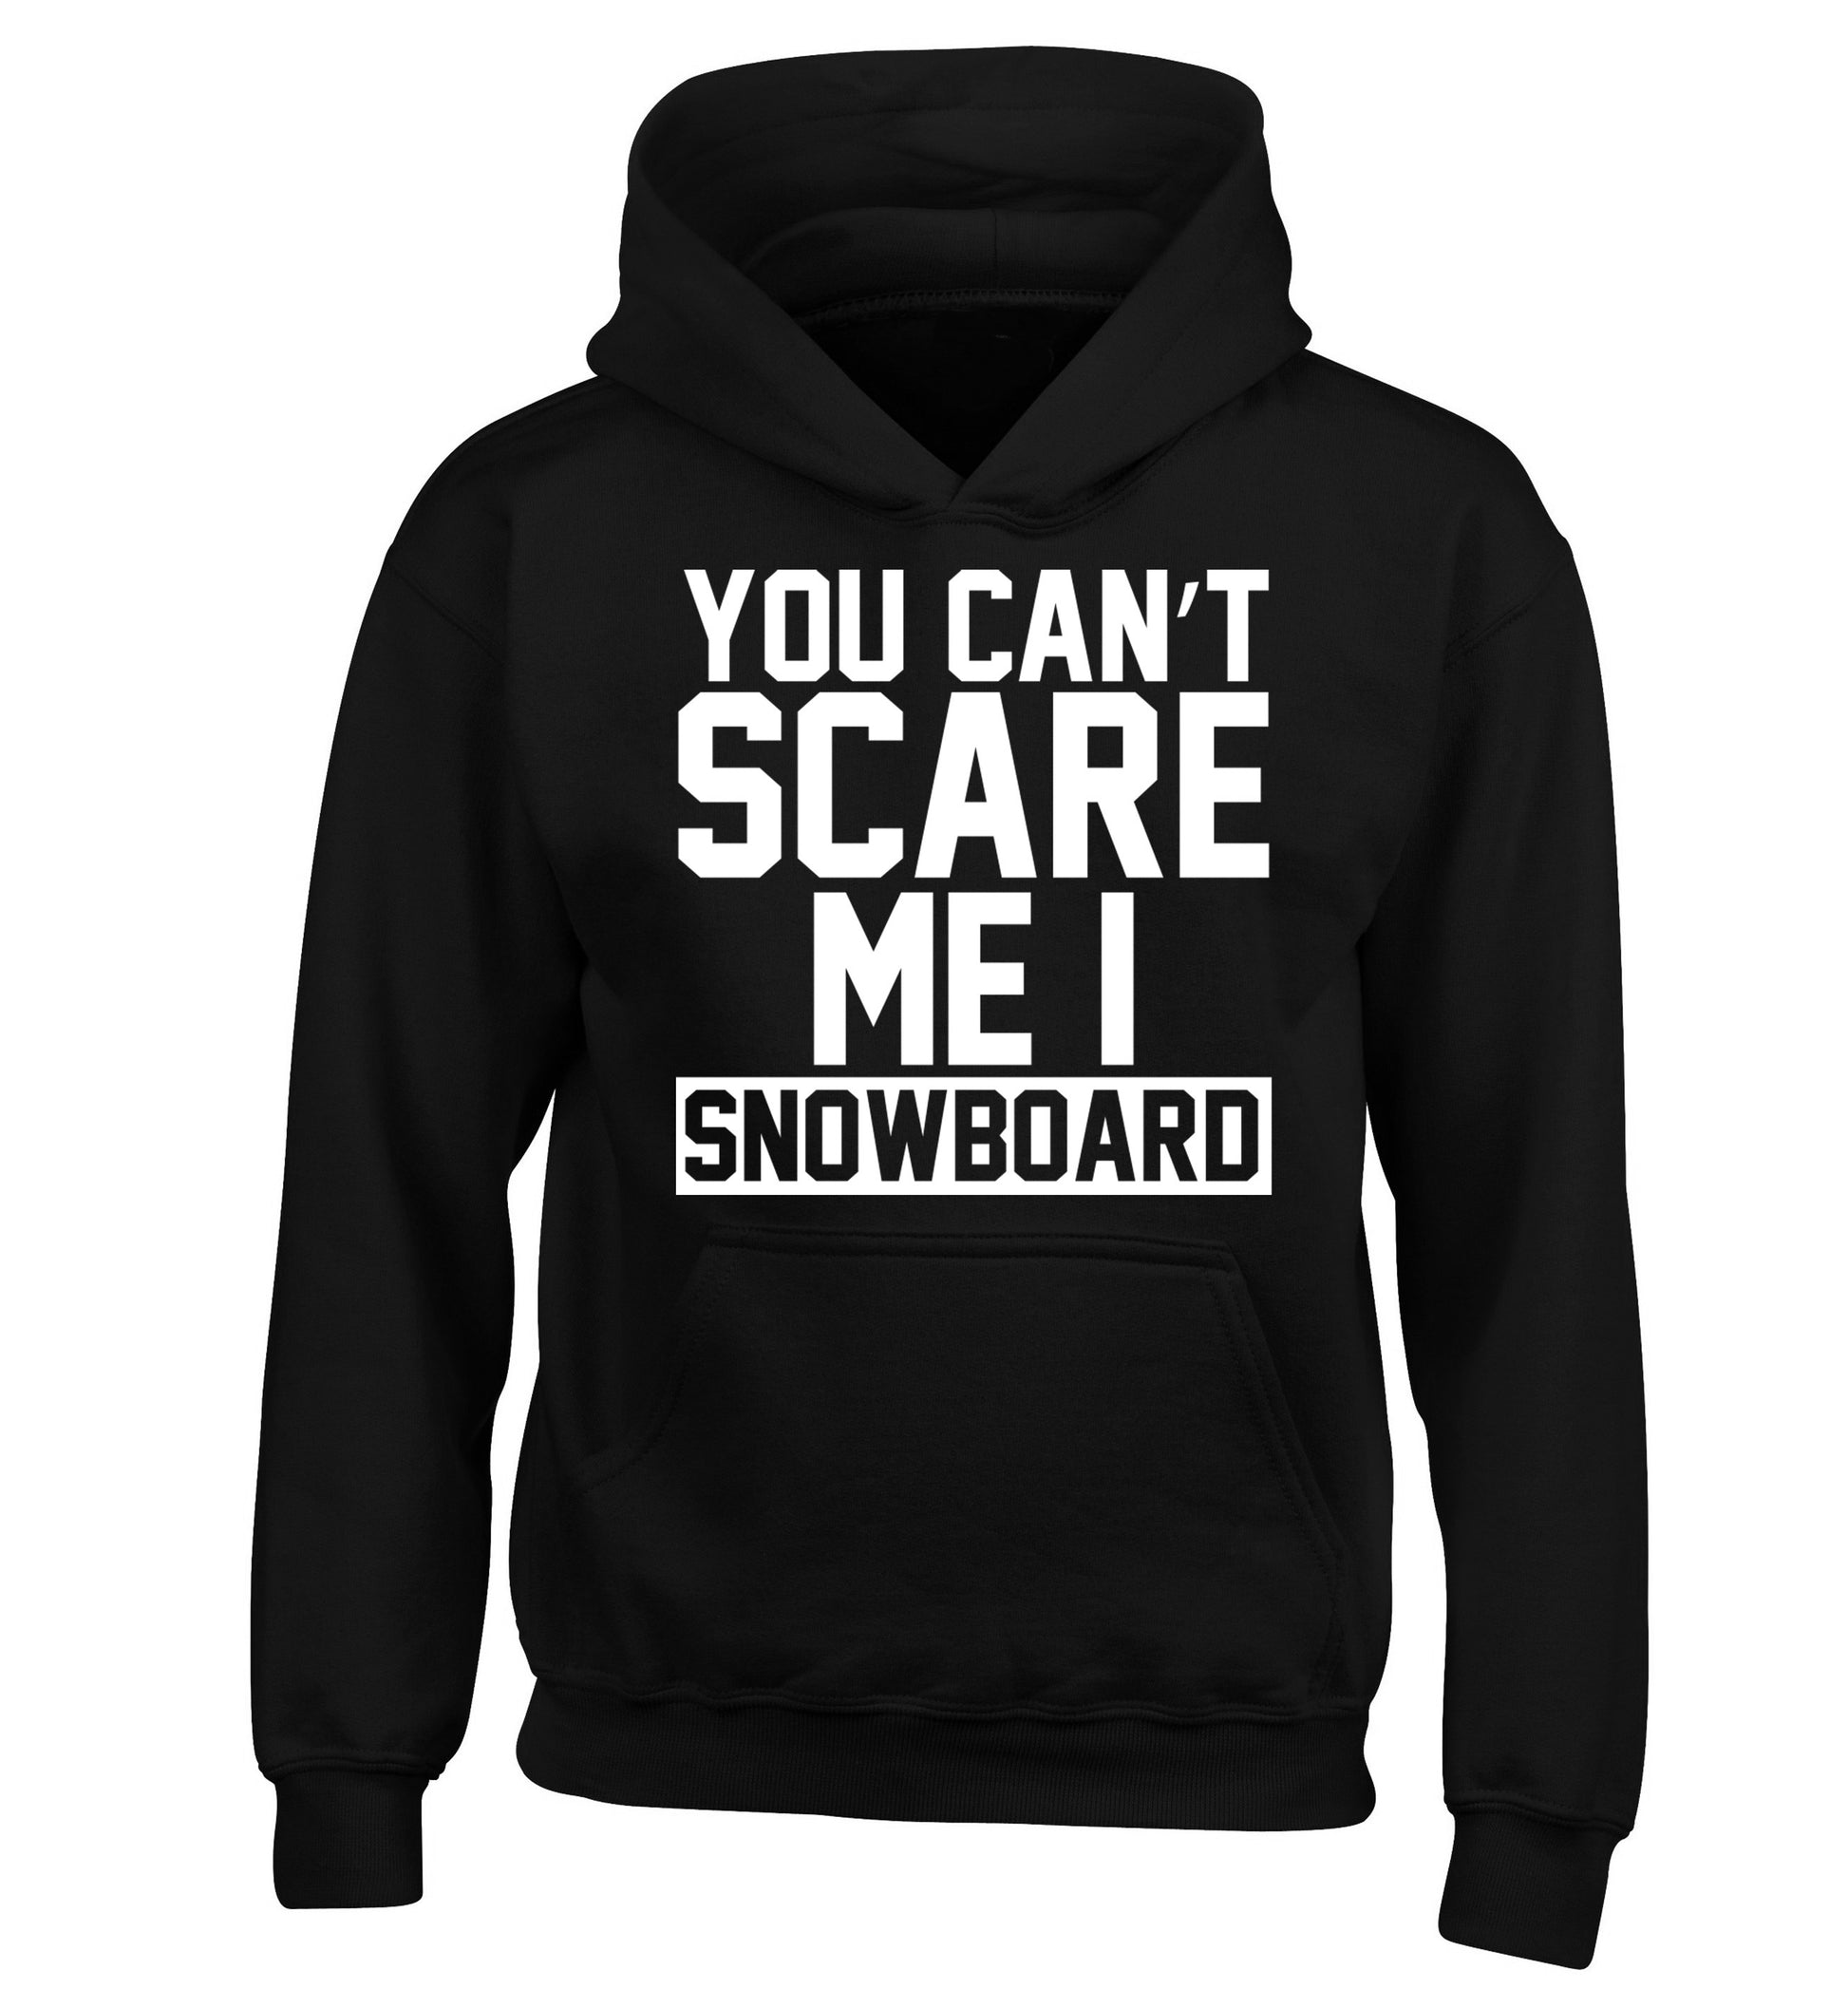 You can't scare me I snowboard children's black hoodie 12-14 Years